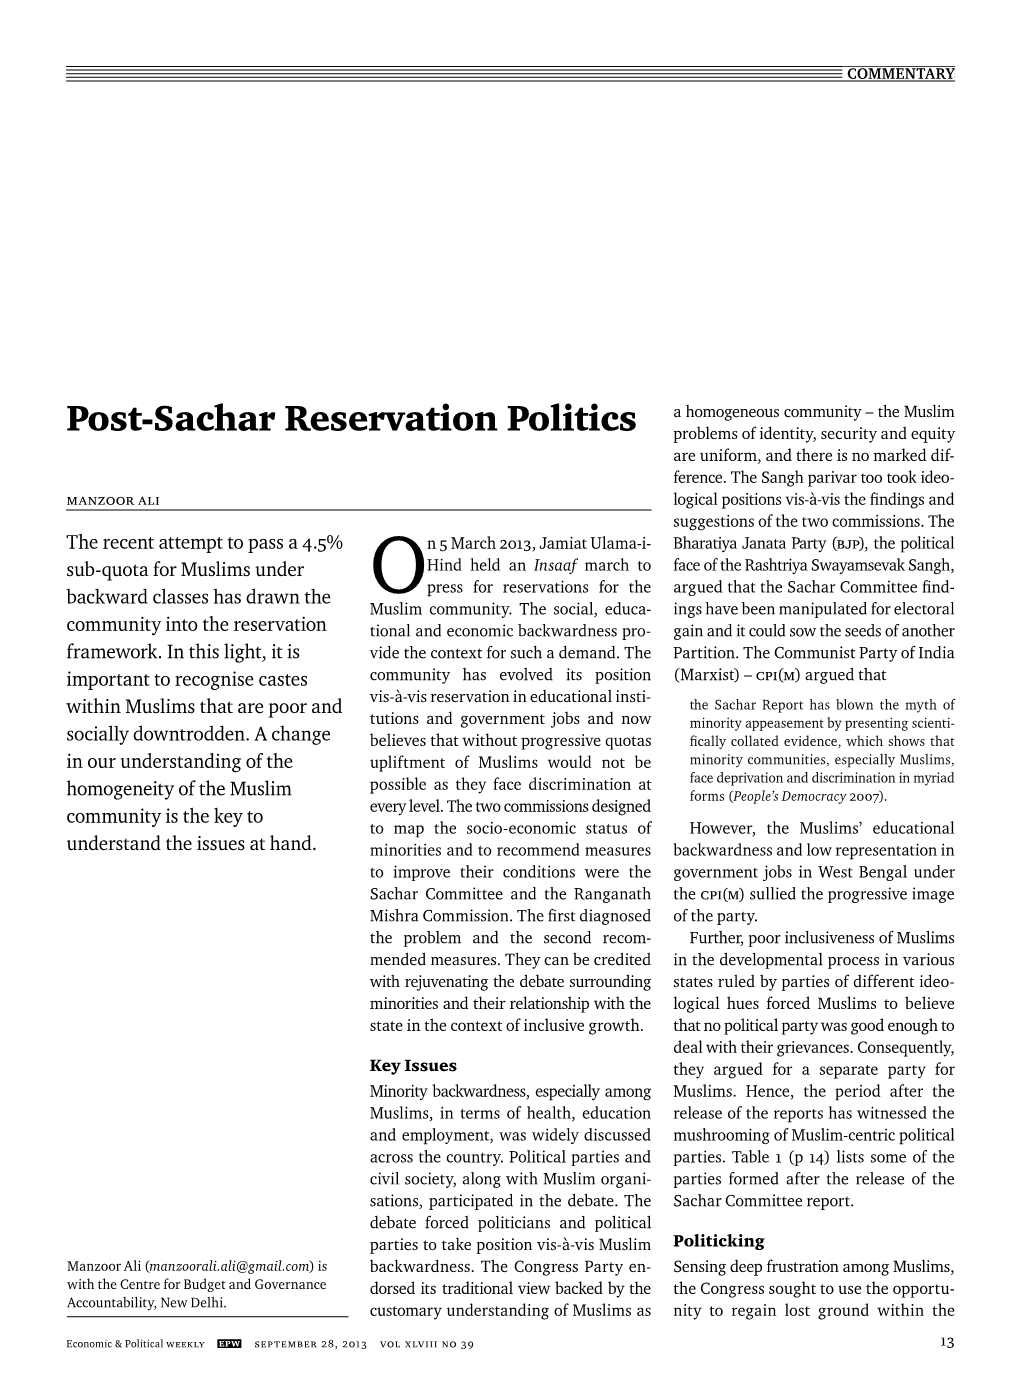 Post-Sachar Reservation Politics Problems of Identity, Security and Equity Are Uniform, and There Is No Marked Dif- Ference